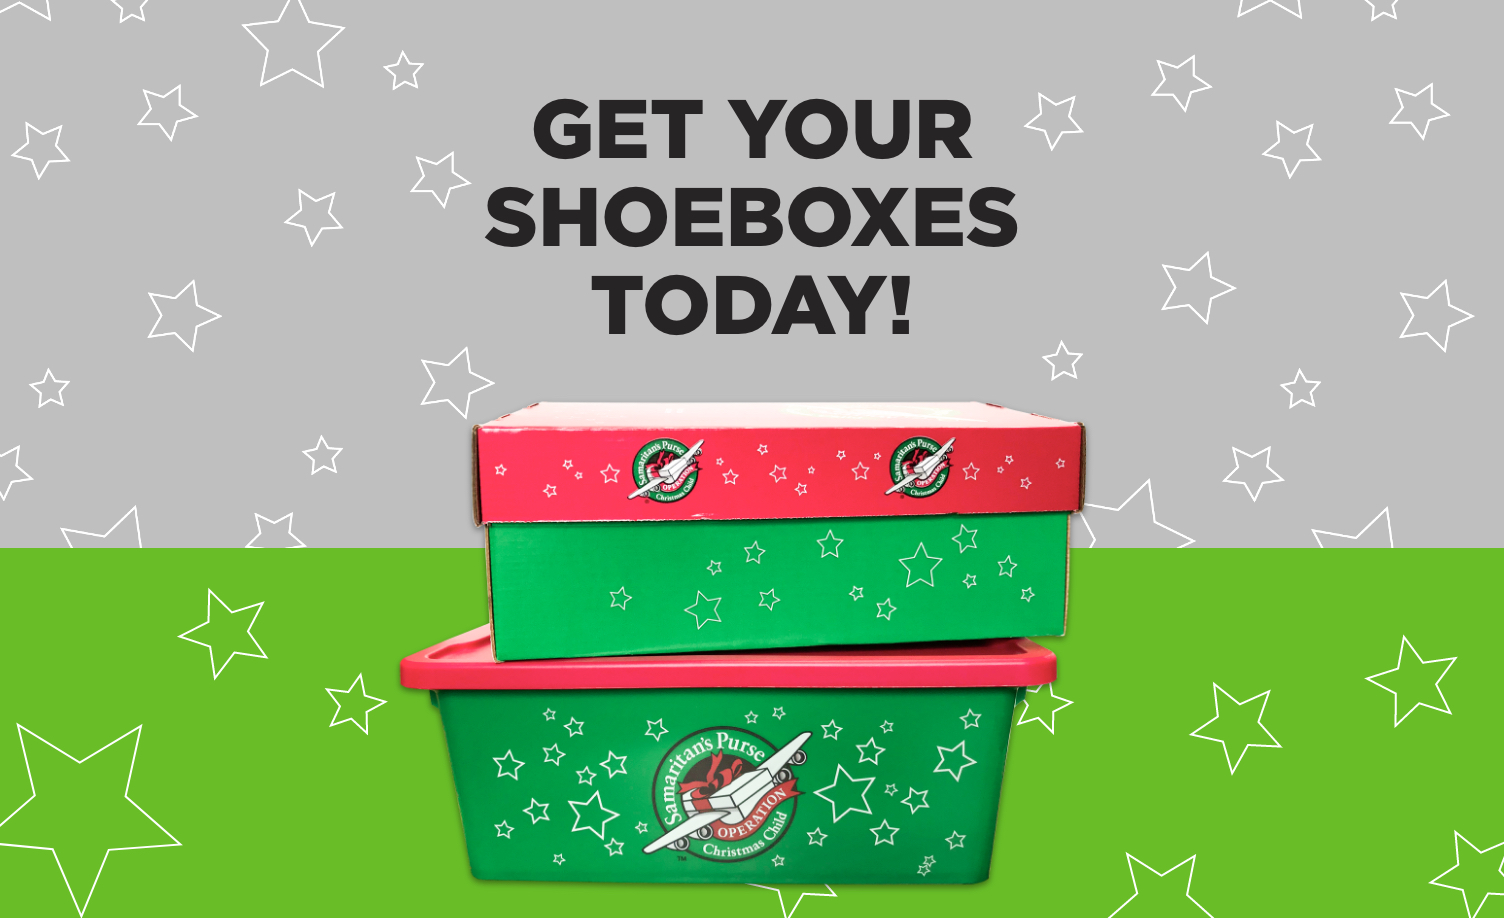 Get Your Shoeboxes Today!